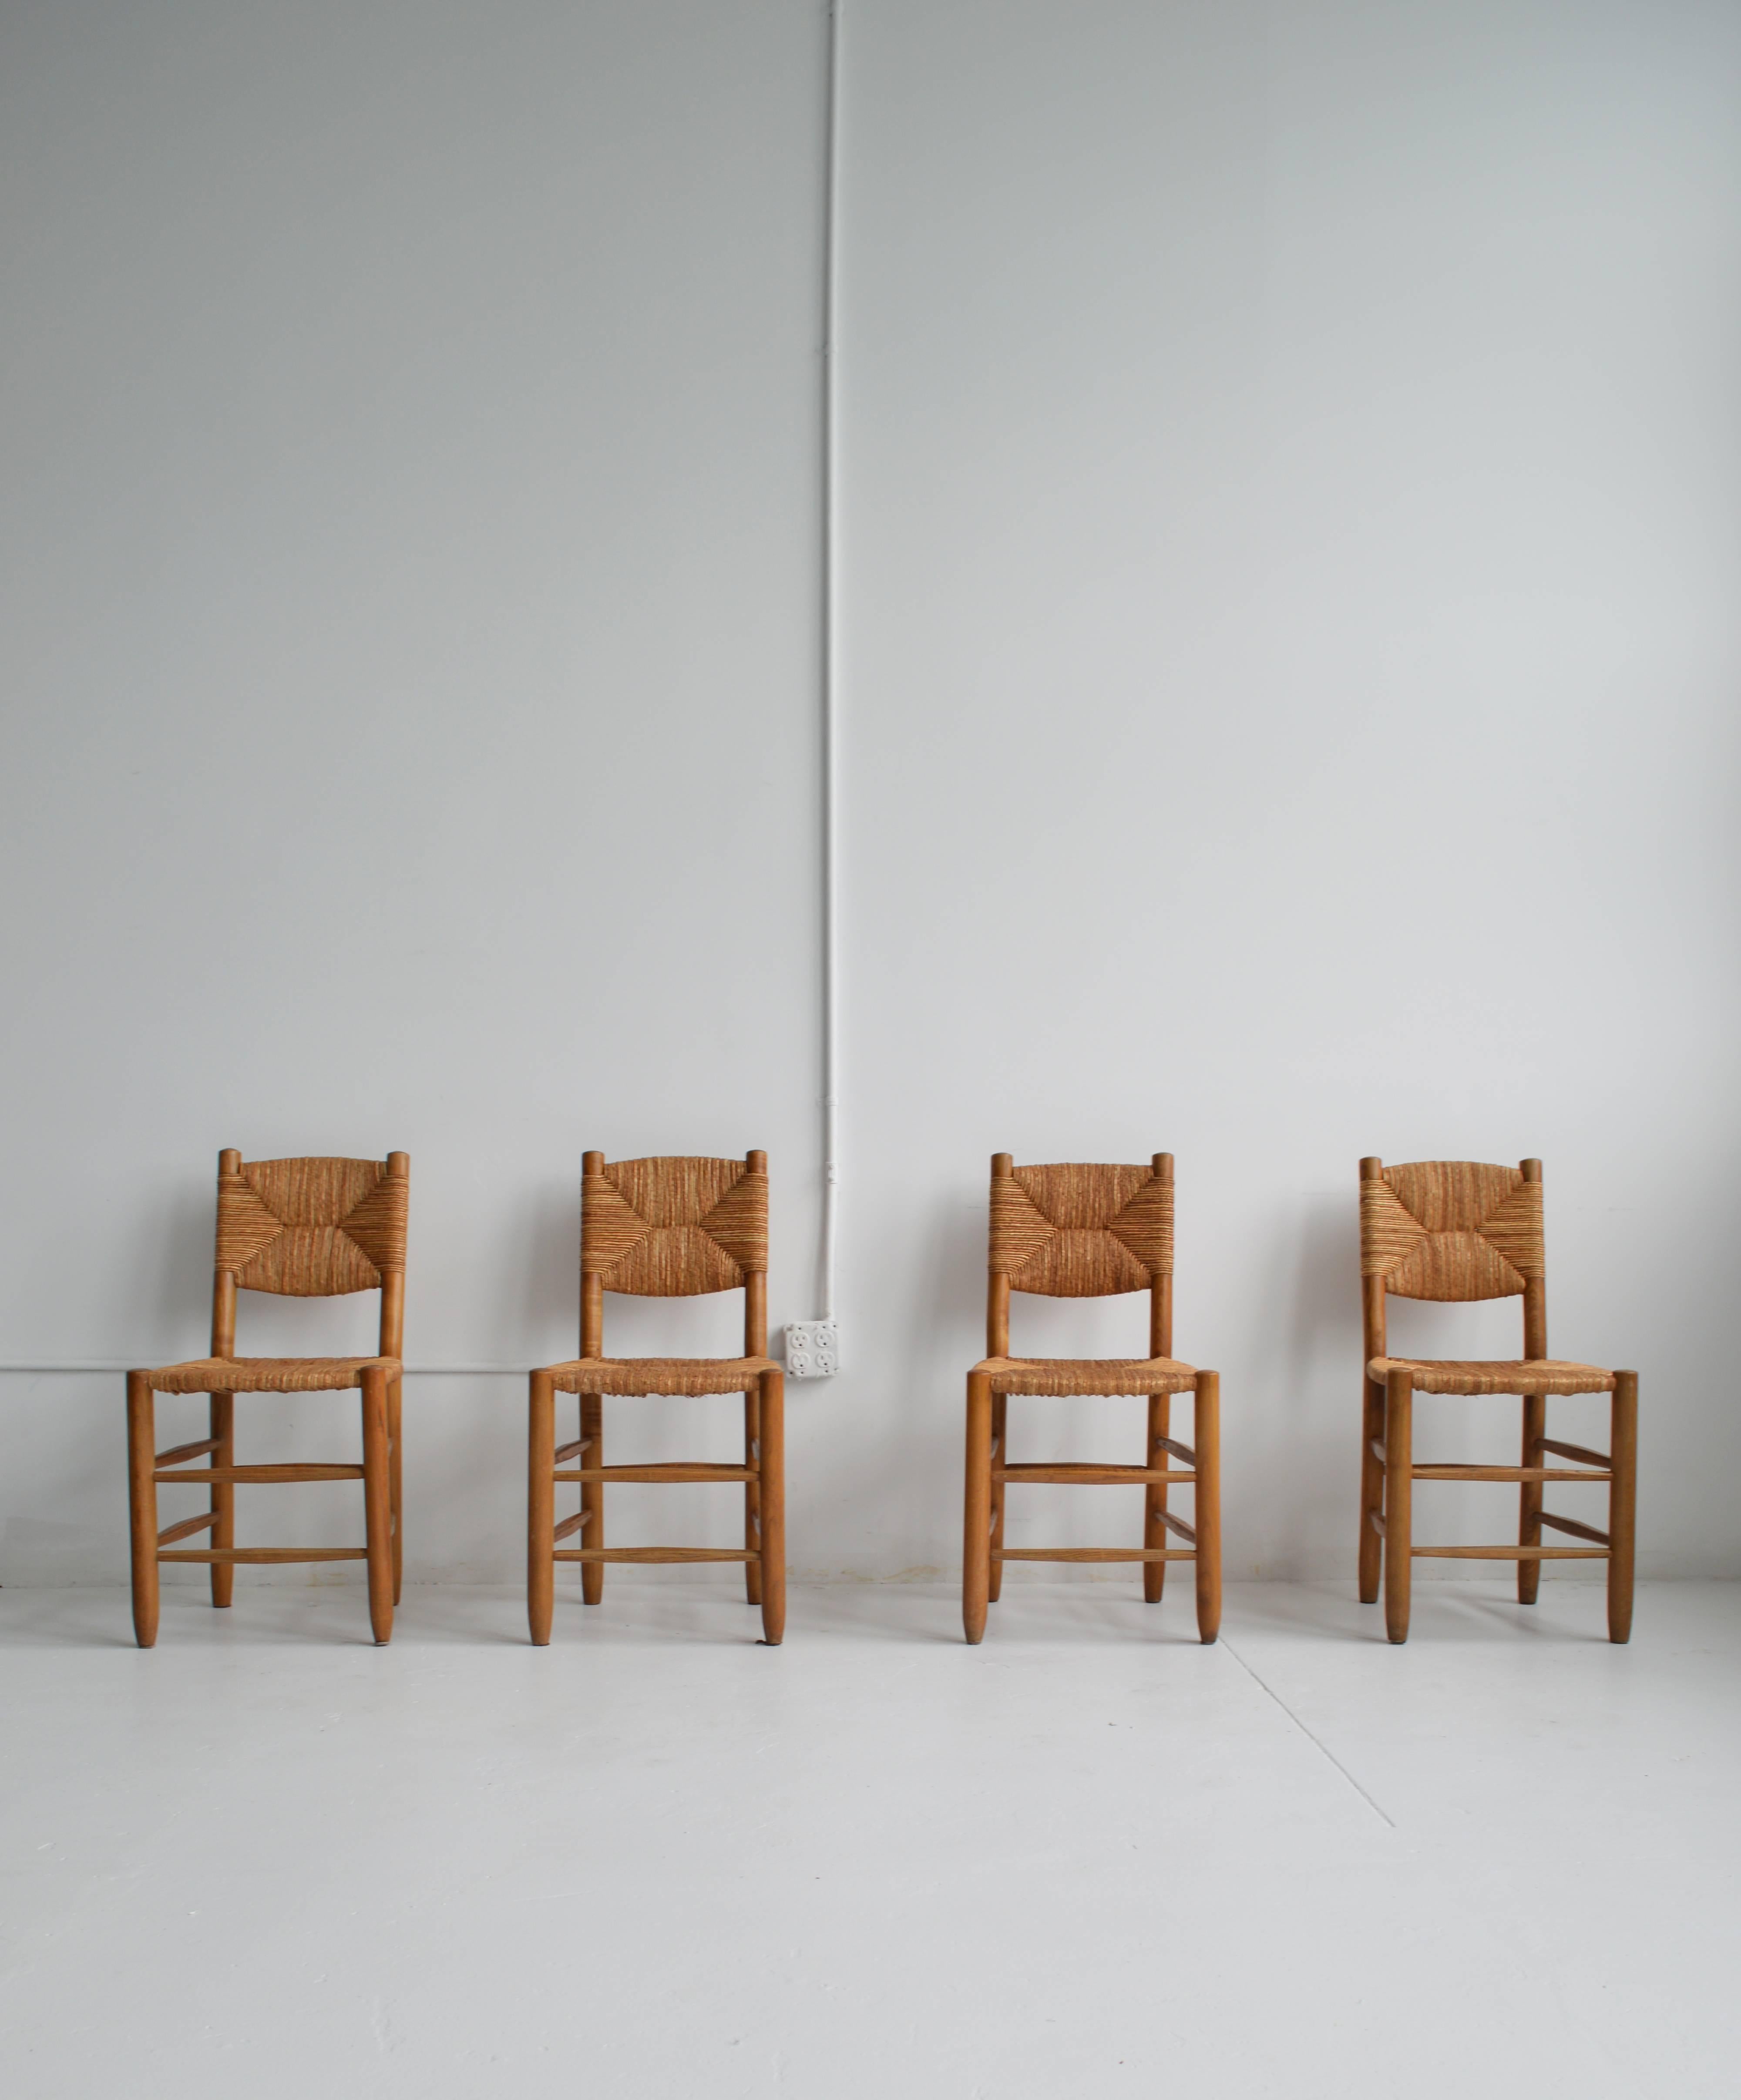 Set of four solid ash wood and rush angled-backed dining chairs by iconic French Modern designer, Charlotte Perriand. These chairs achieve a striking balance of relaxed and refined design. The set is in good vintage condition with a beautiful patina